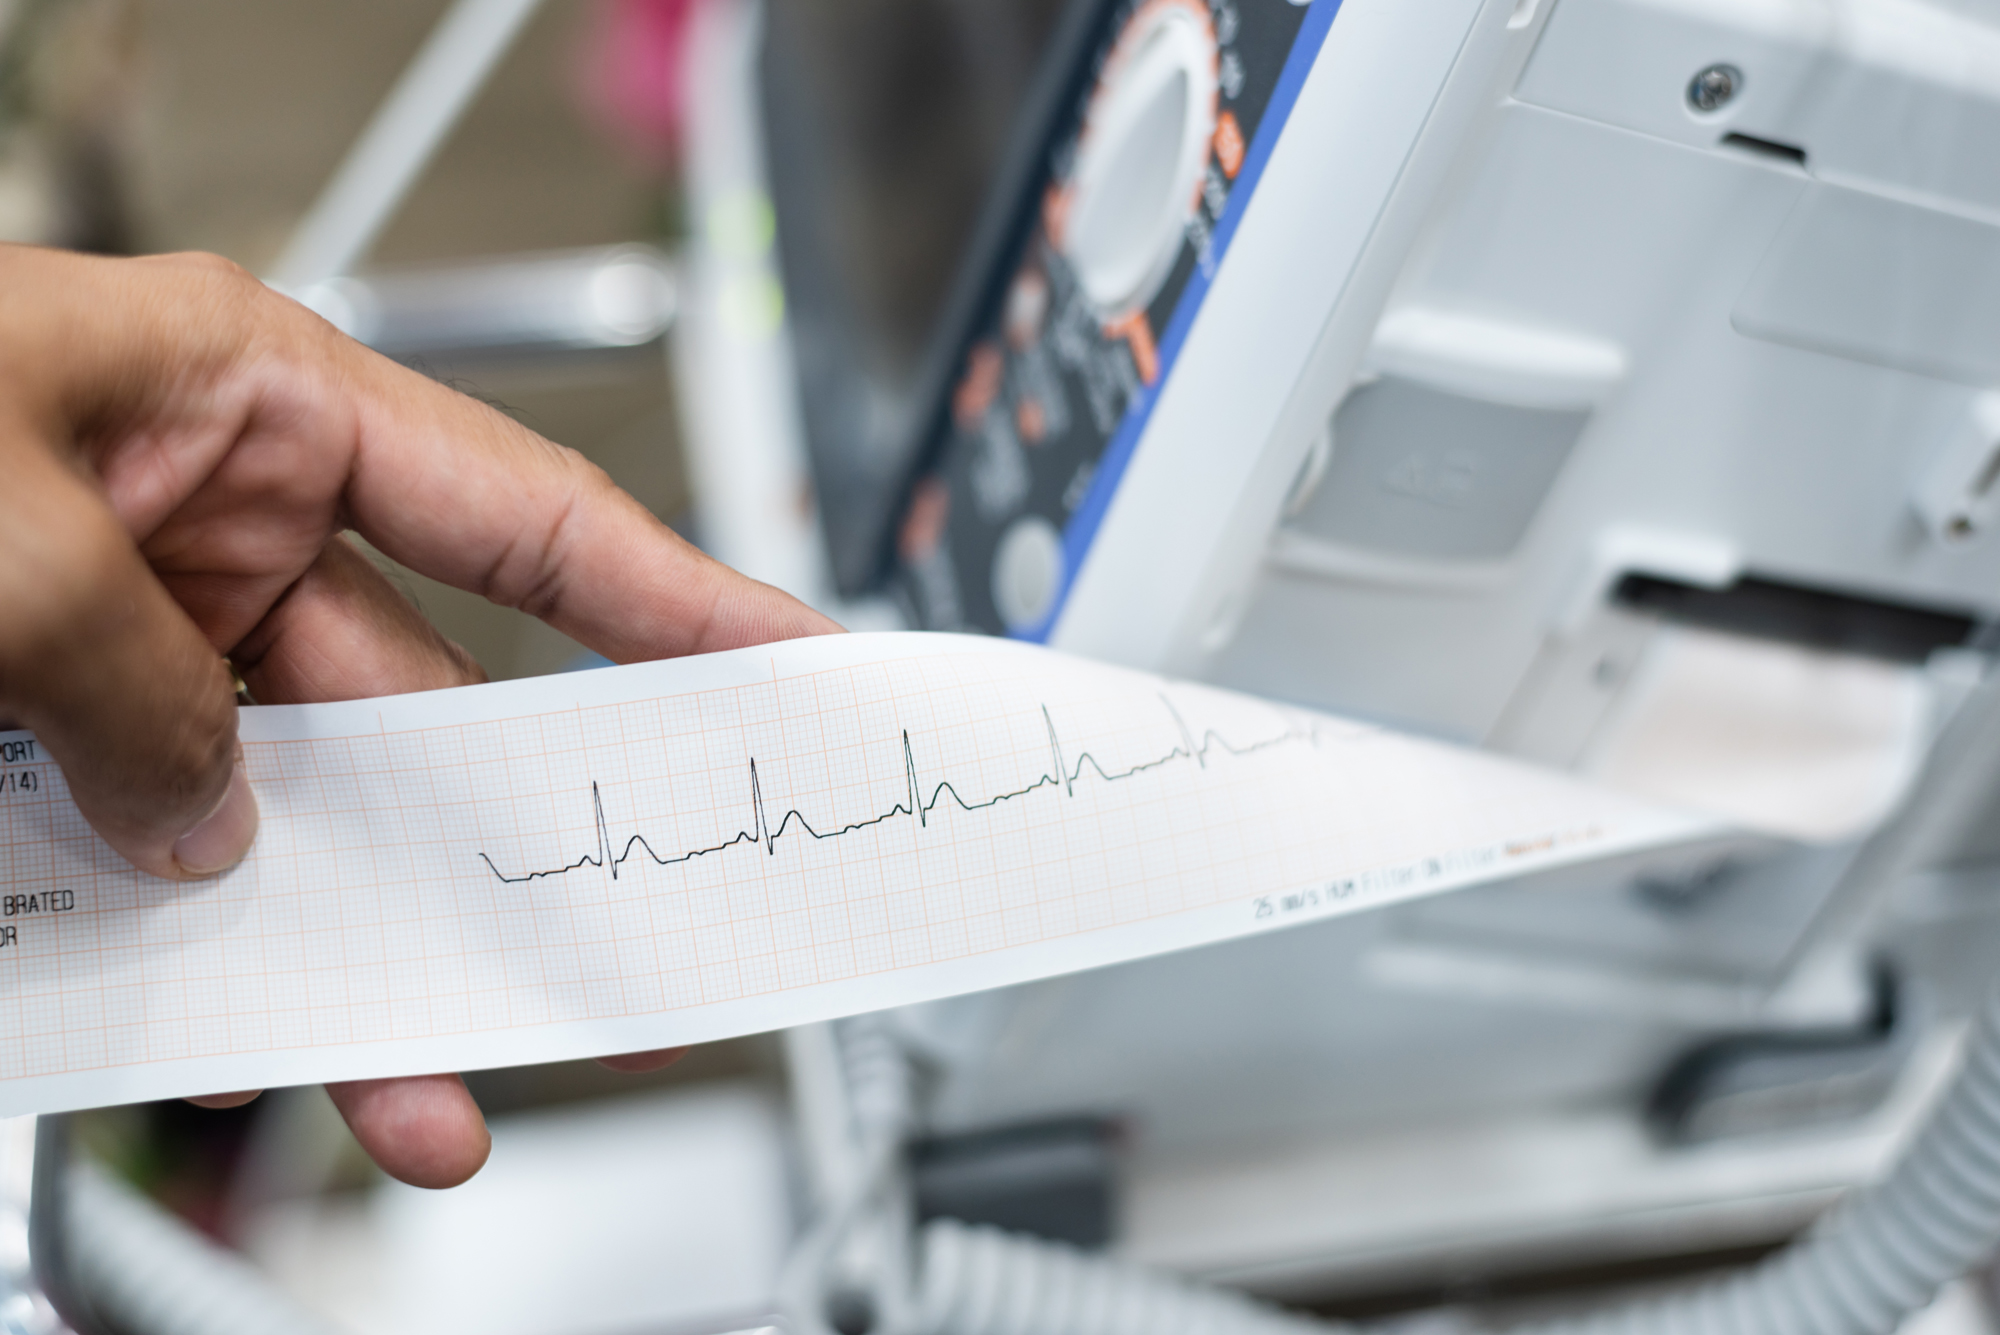 What Is an EKG Used For?